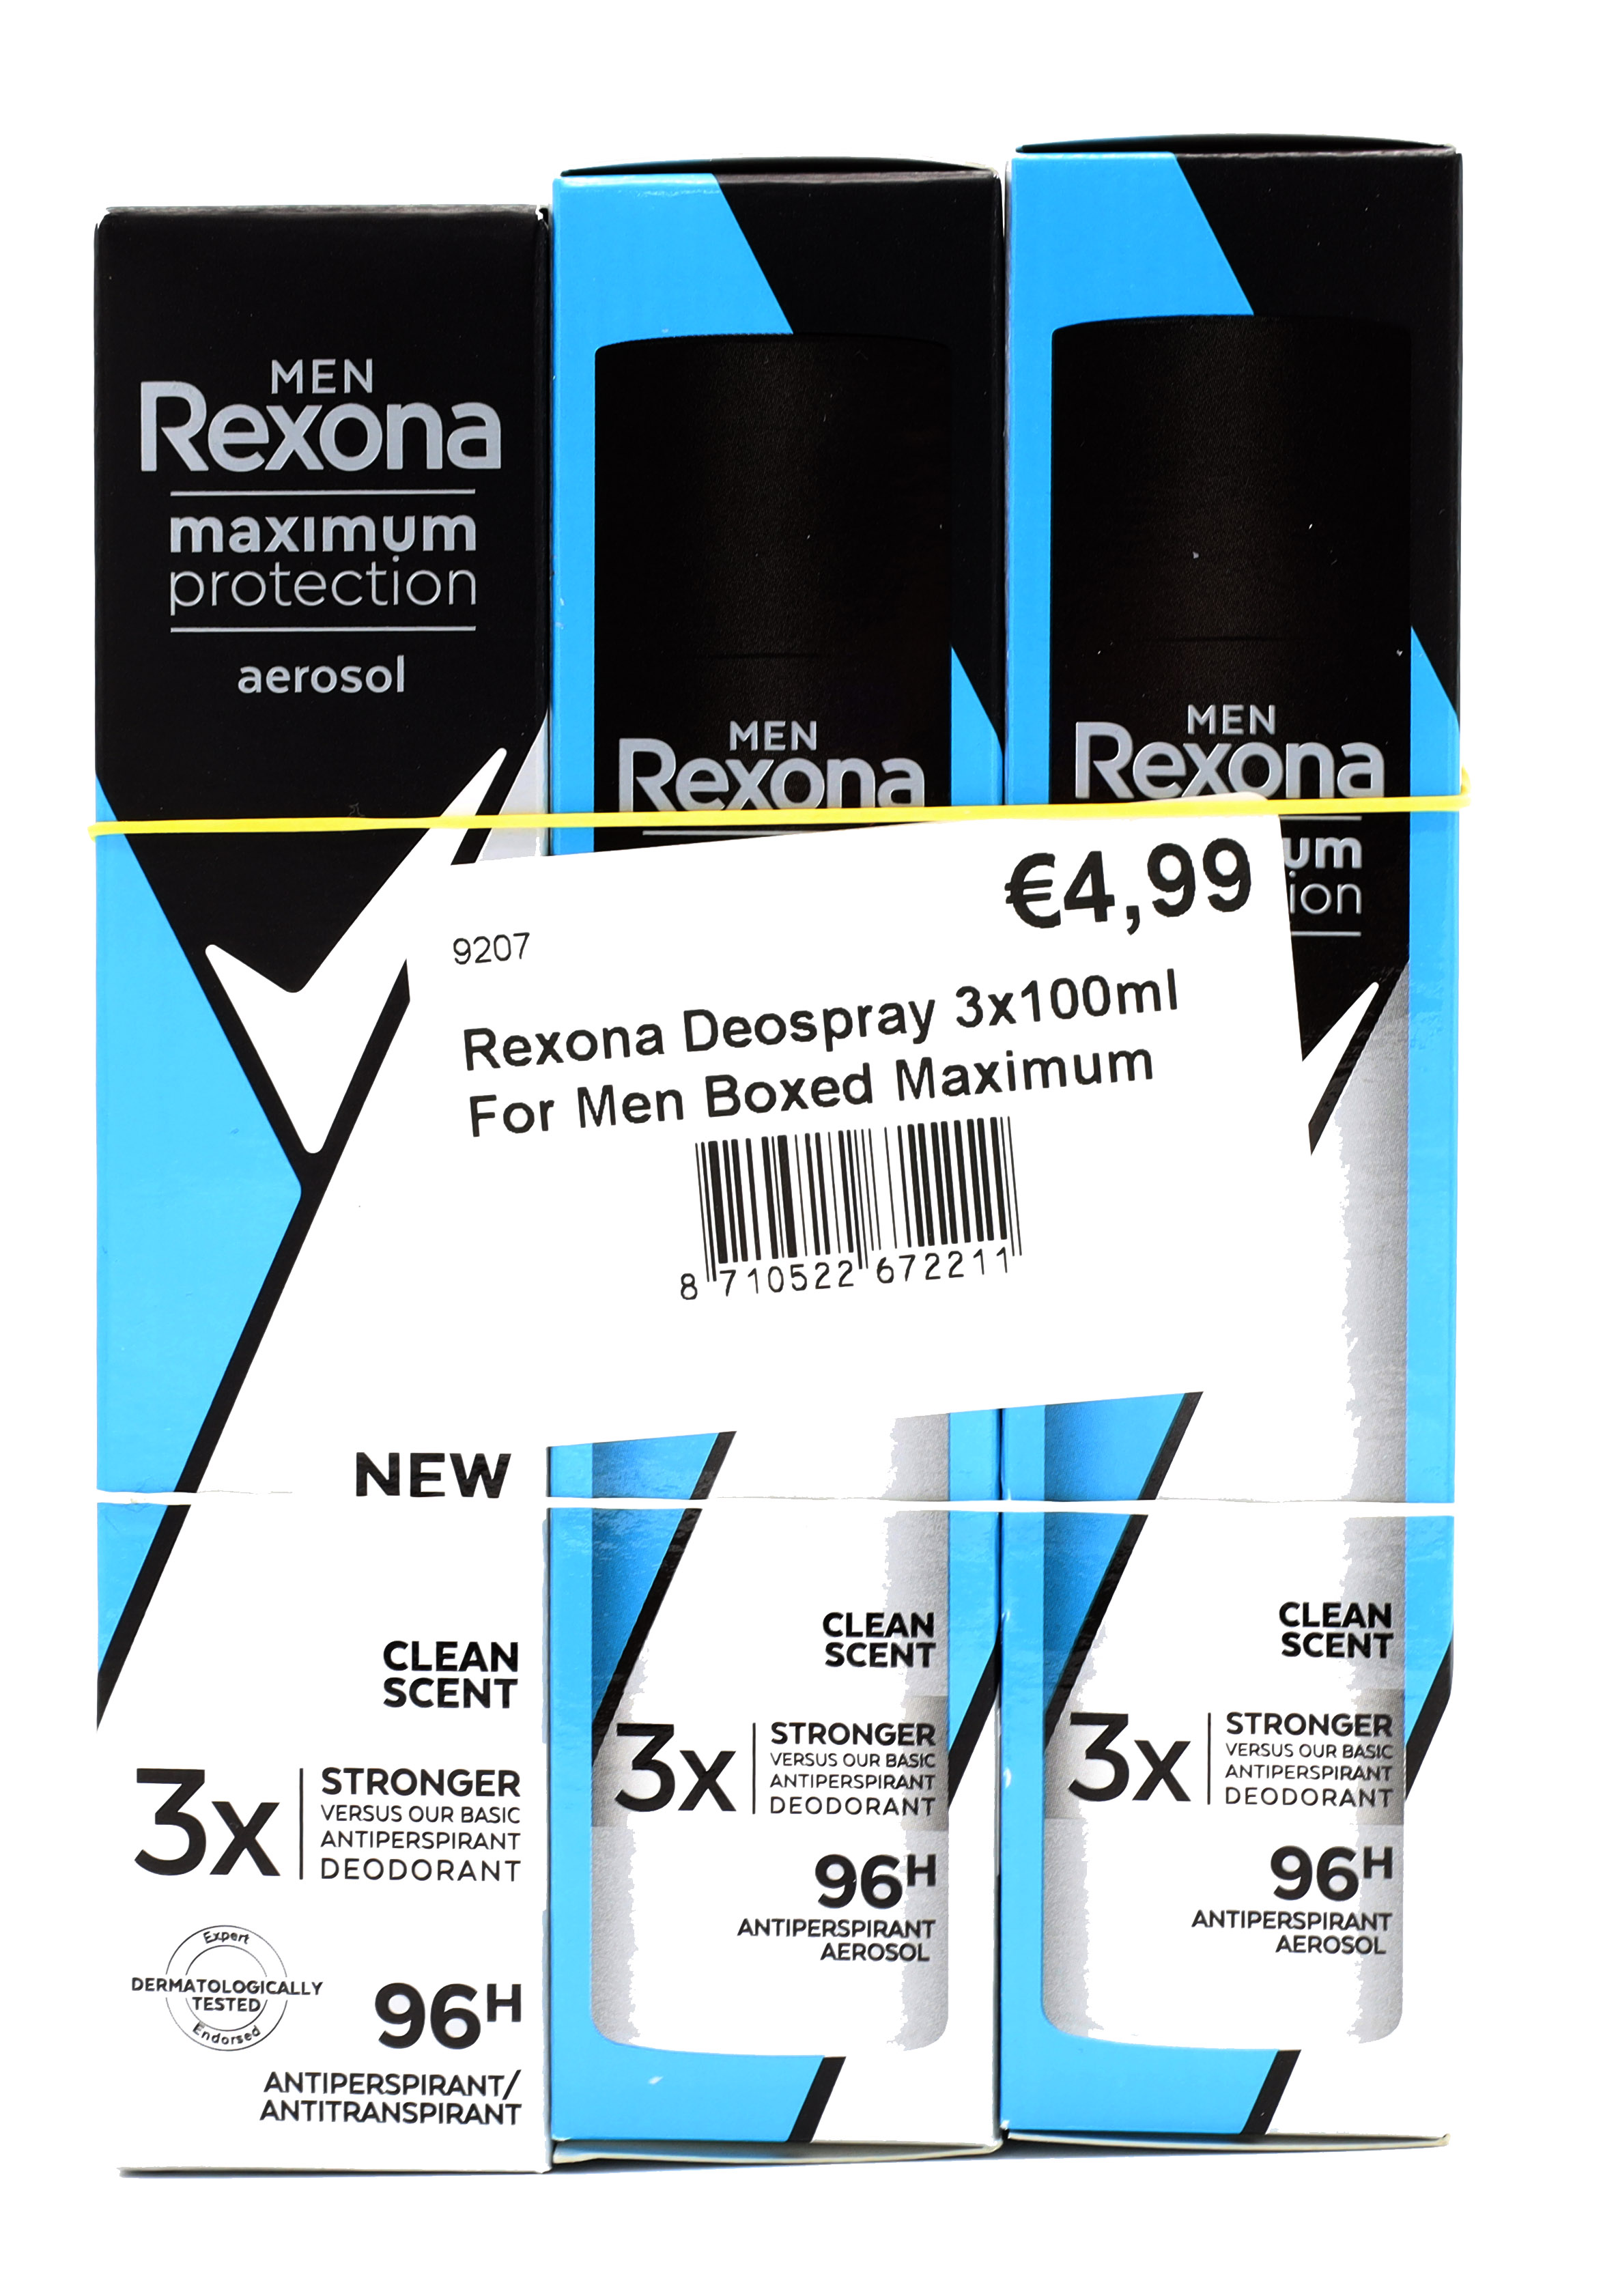 Rexona Deospray 3x100ml For Men Boxed Maximum Protection Clean Scent